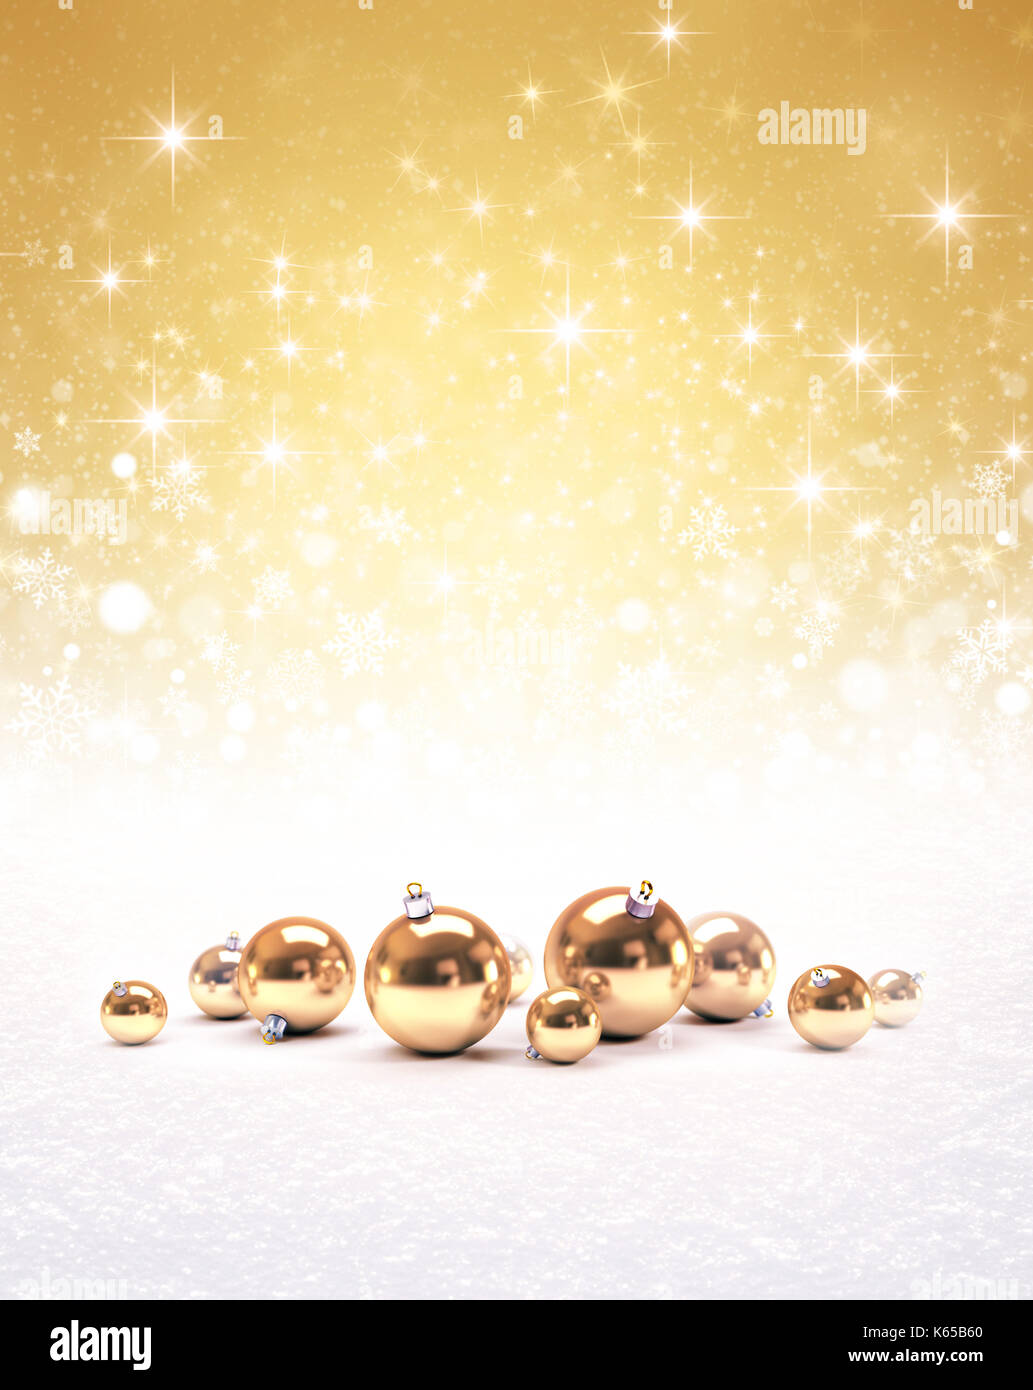 Golden christmas balls, falling snowflakes, white snow and bright light on a glittering gold colored background Stock Photo